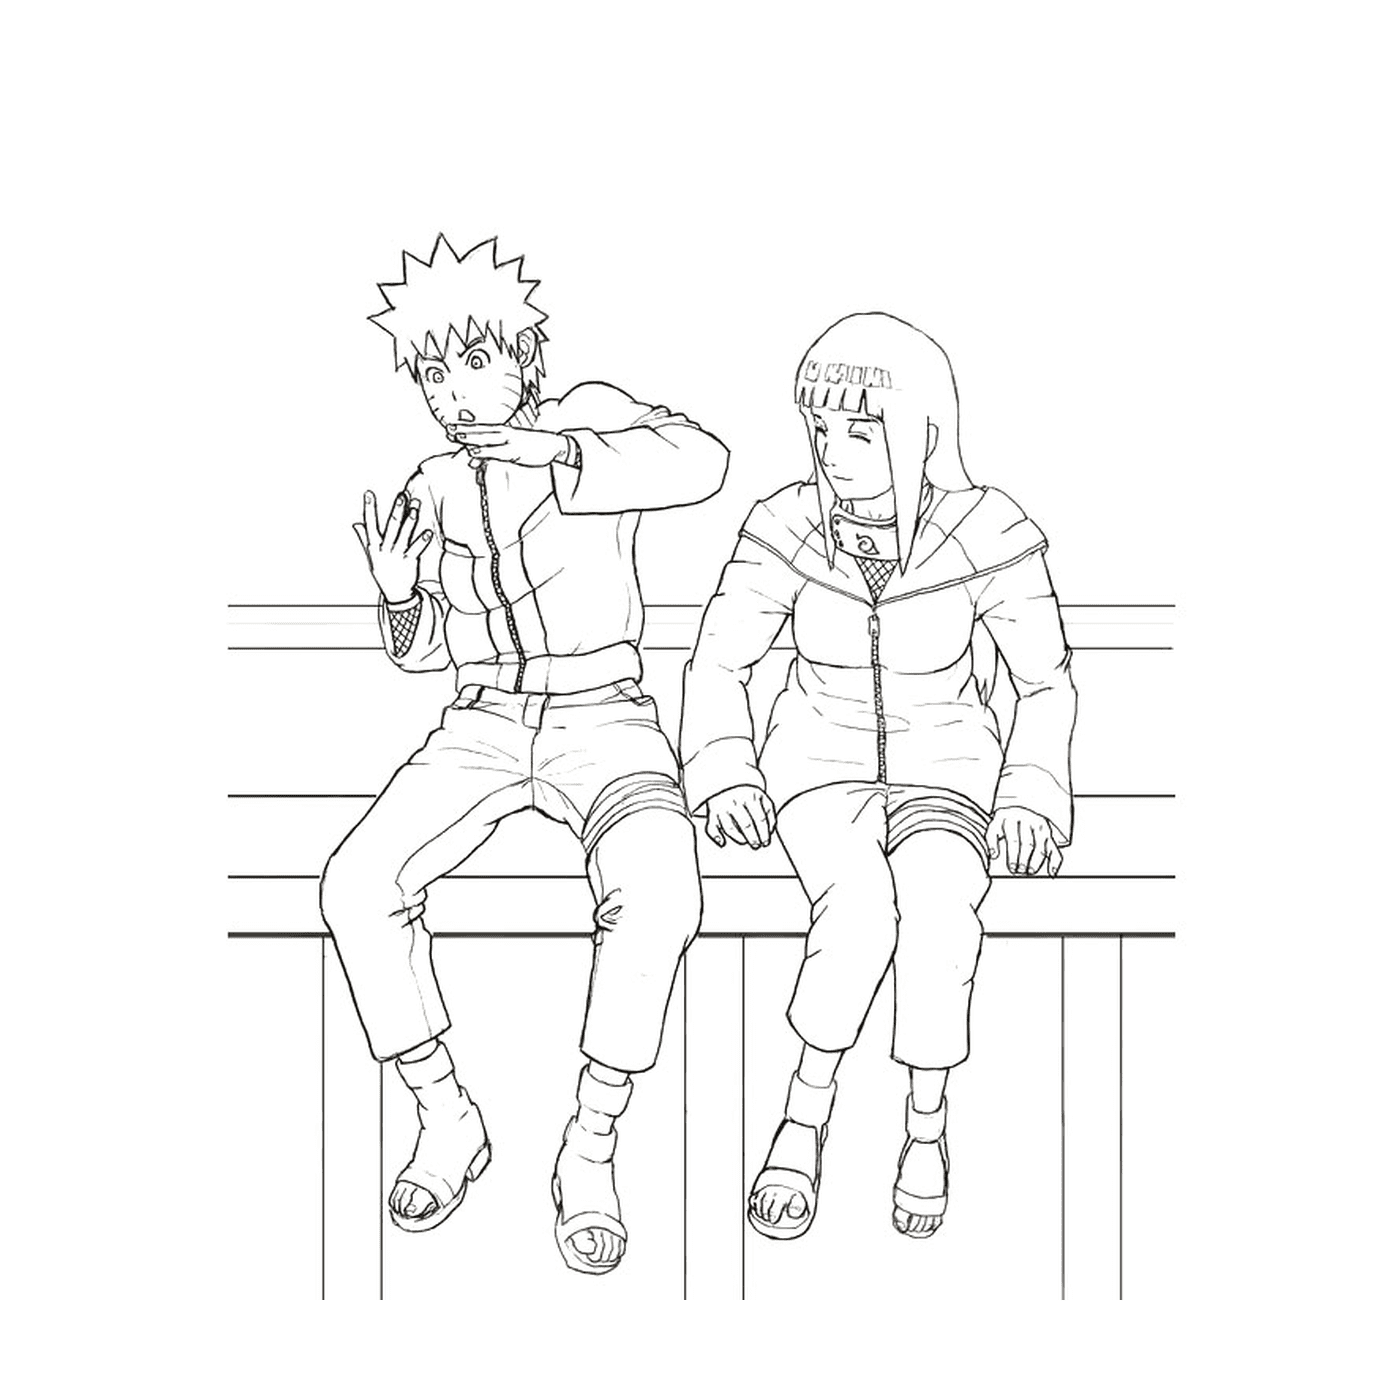  A couple of people sitting on a wooden bench 